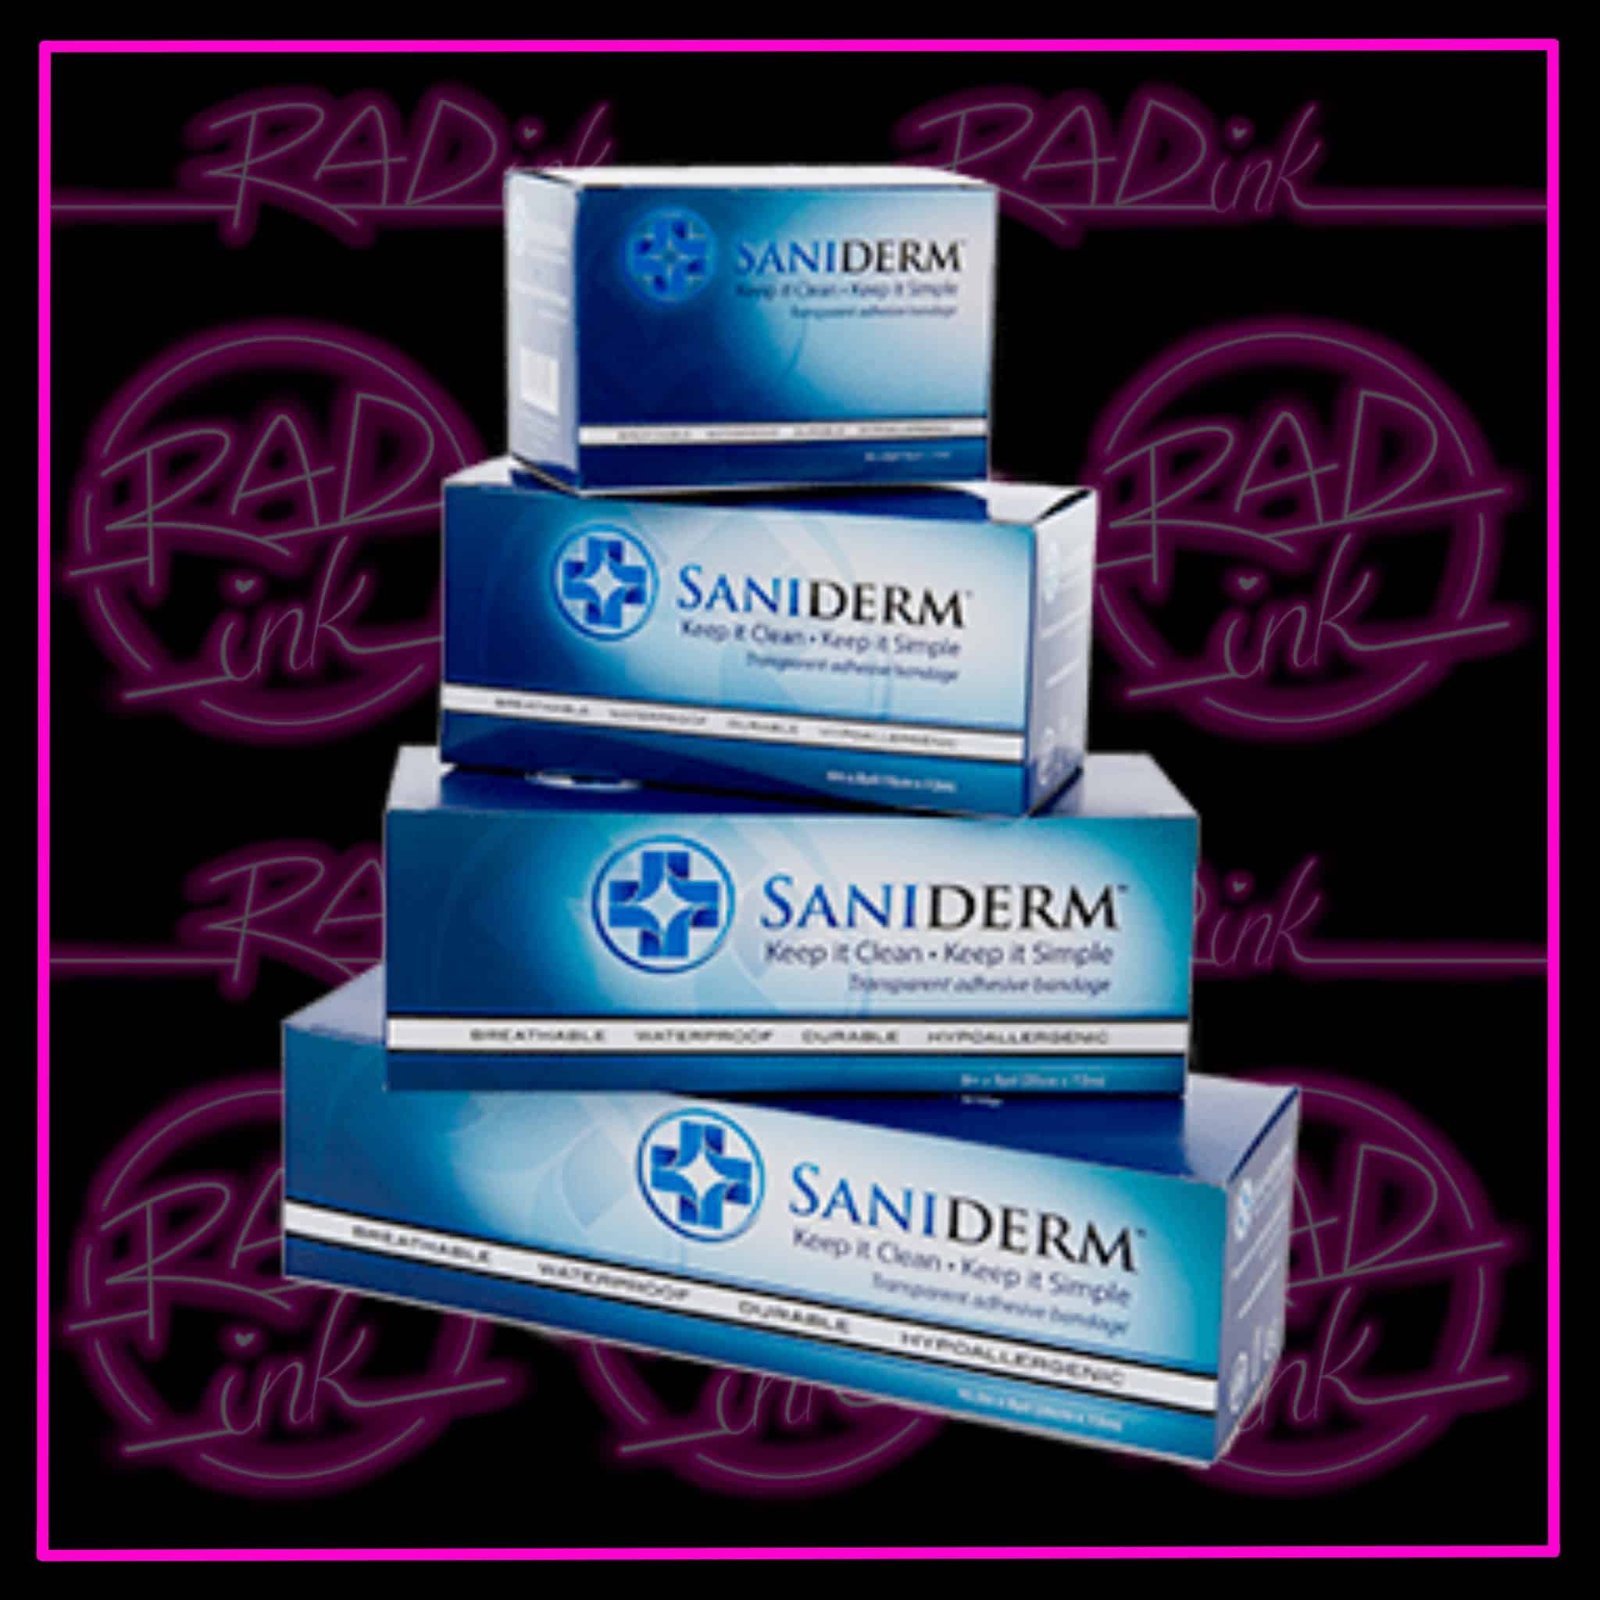 Tattoo Aftercare with Saniderm - Rad Ink